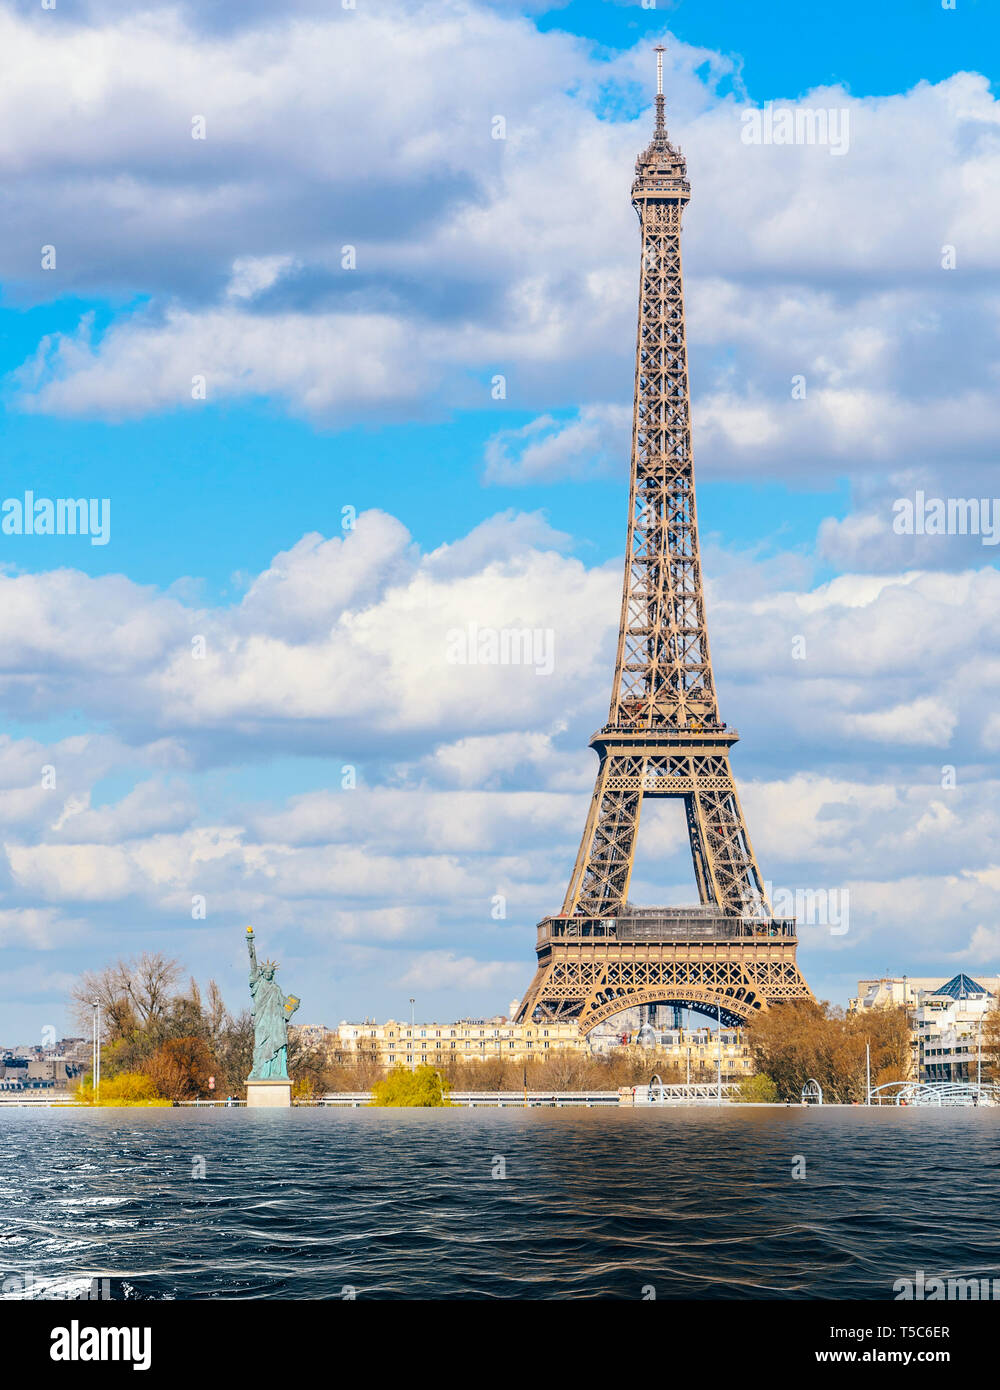 Global warming, melting ice caps, climate change flood concept in Paris, France. Stock Photo